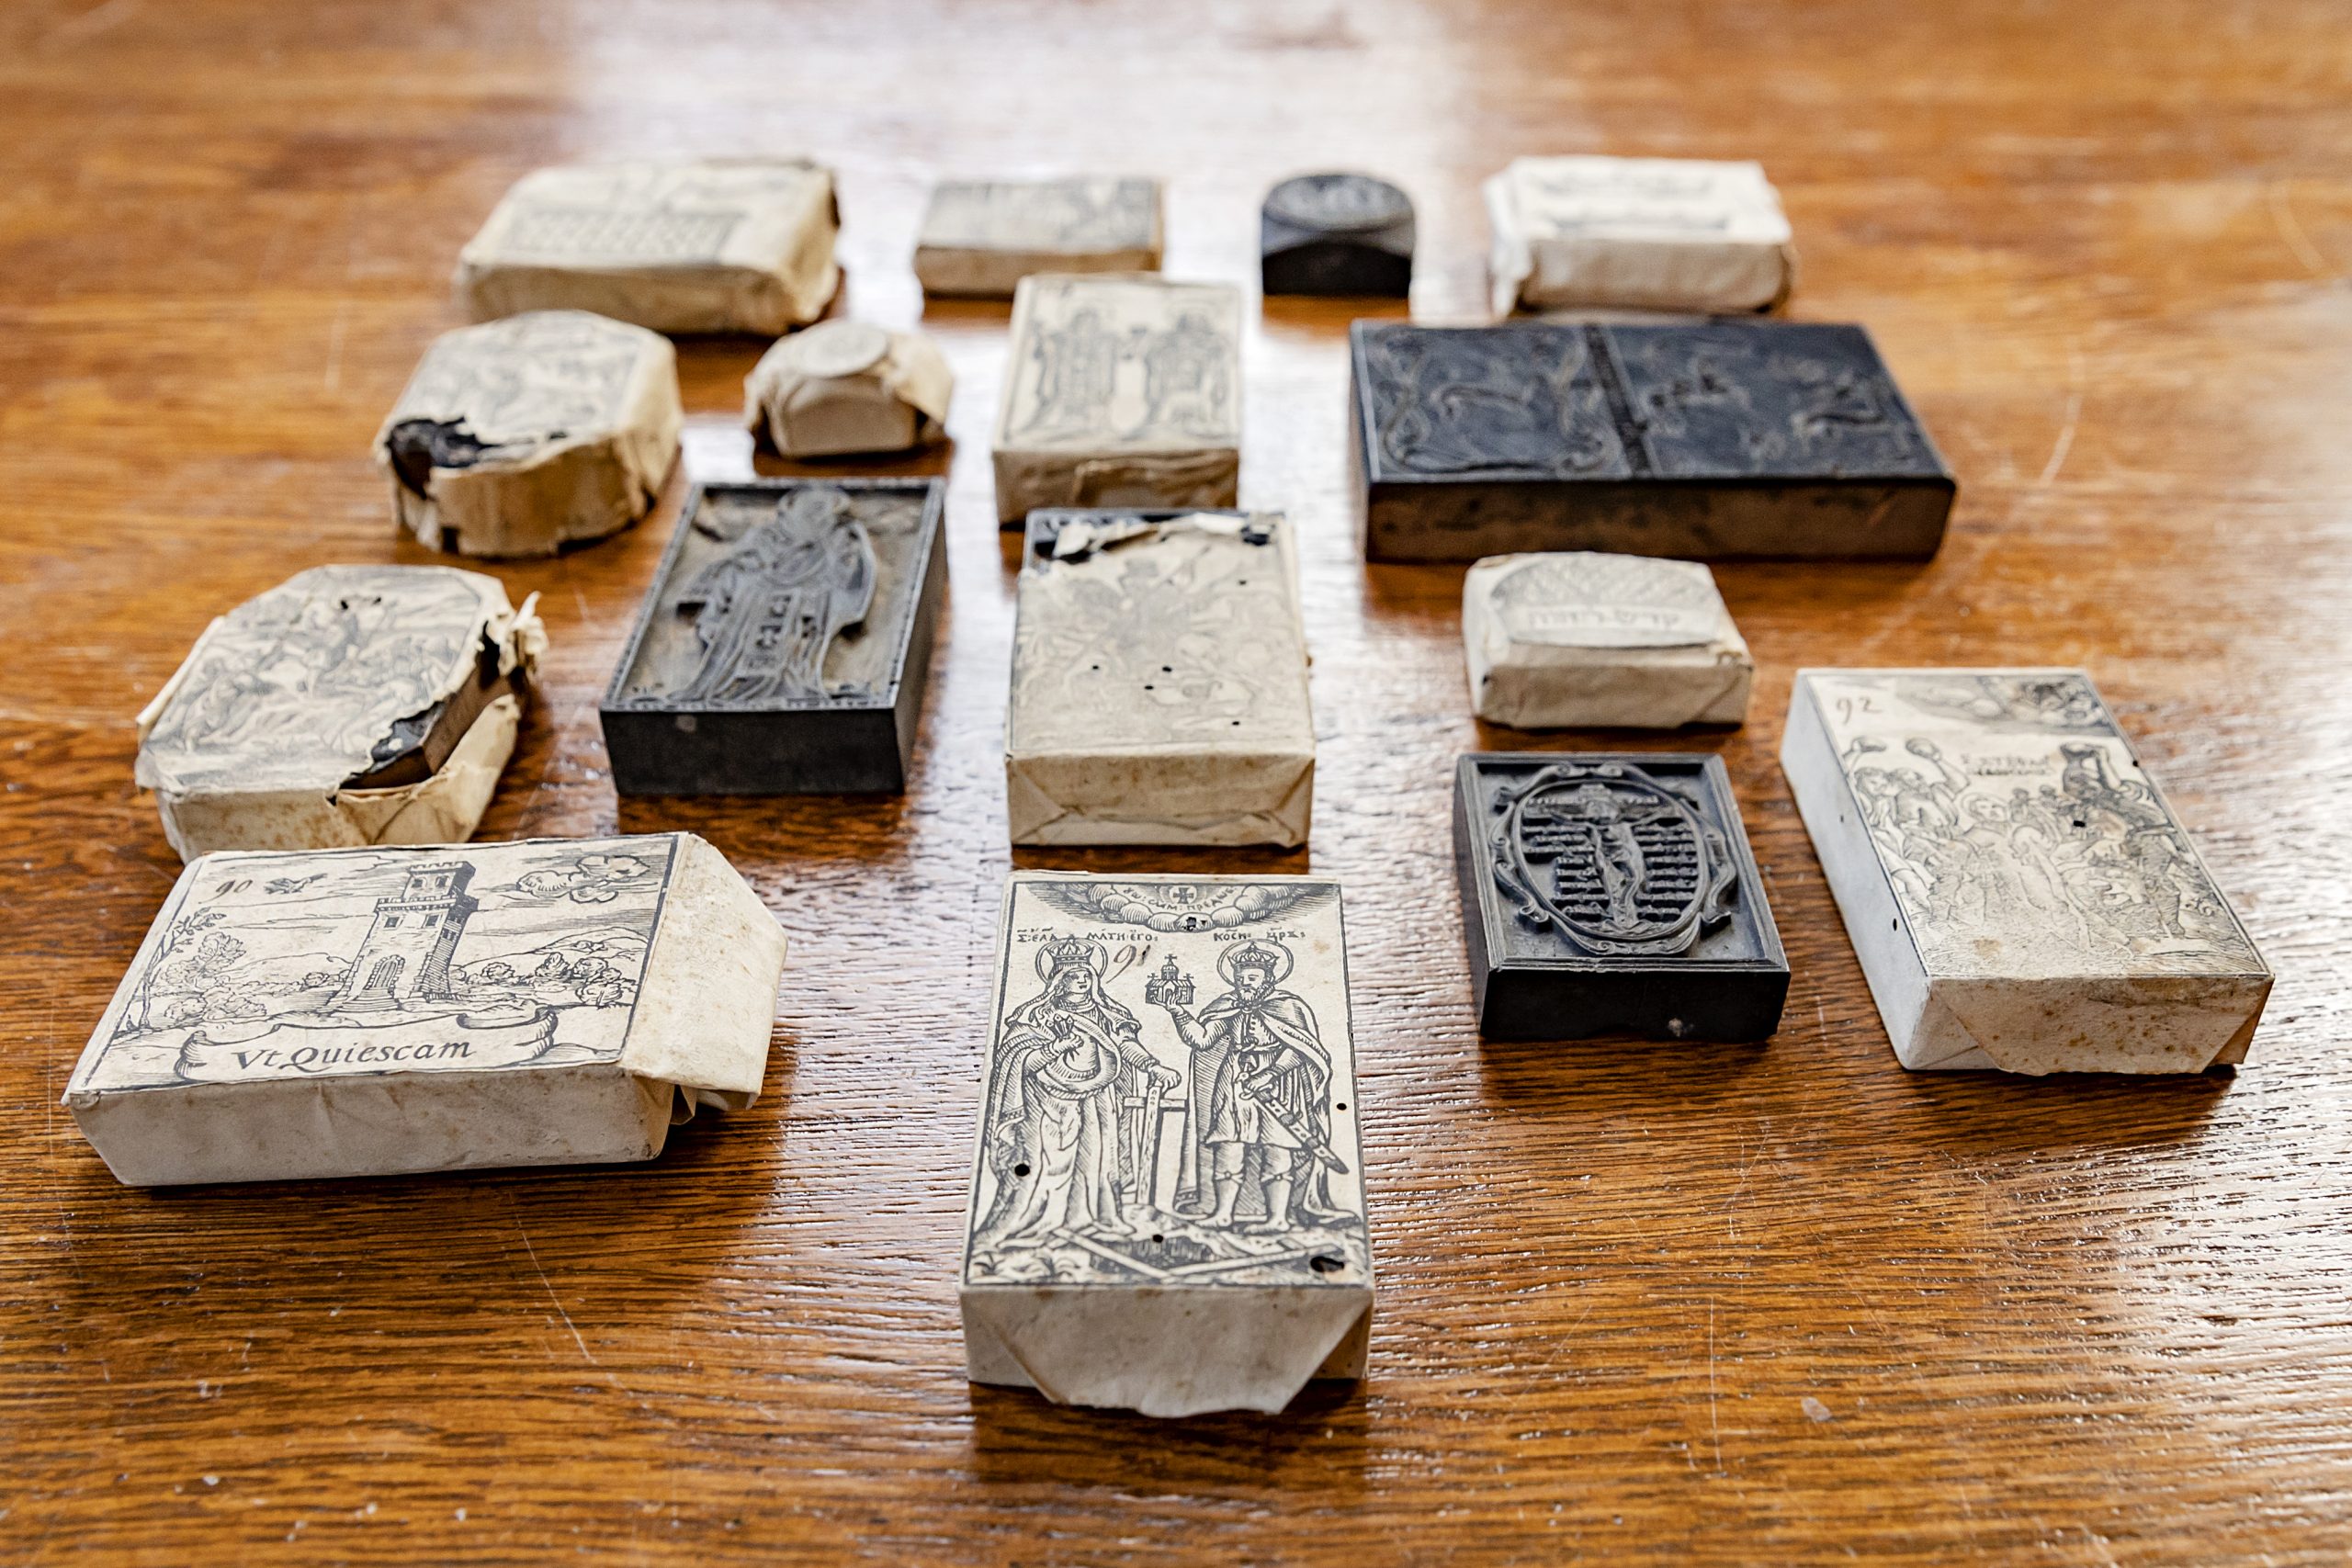 A selection of woordcut printing blocks from the recently acquired 900 woodcut printing block collection